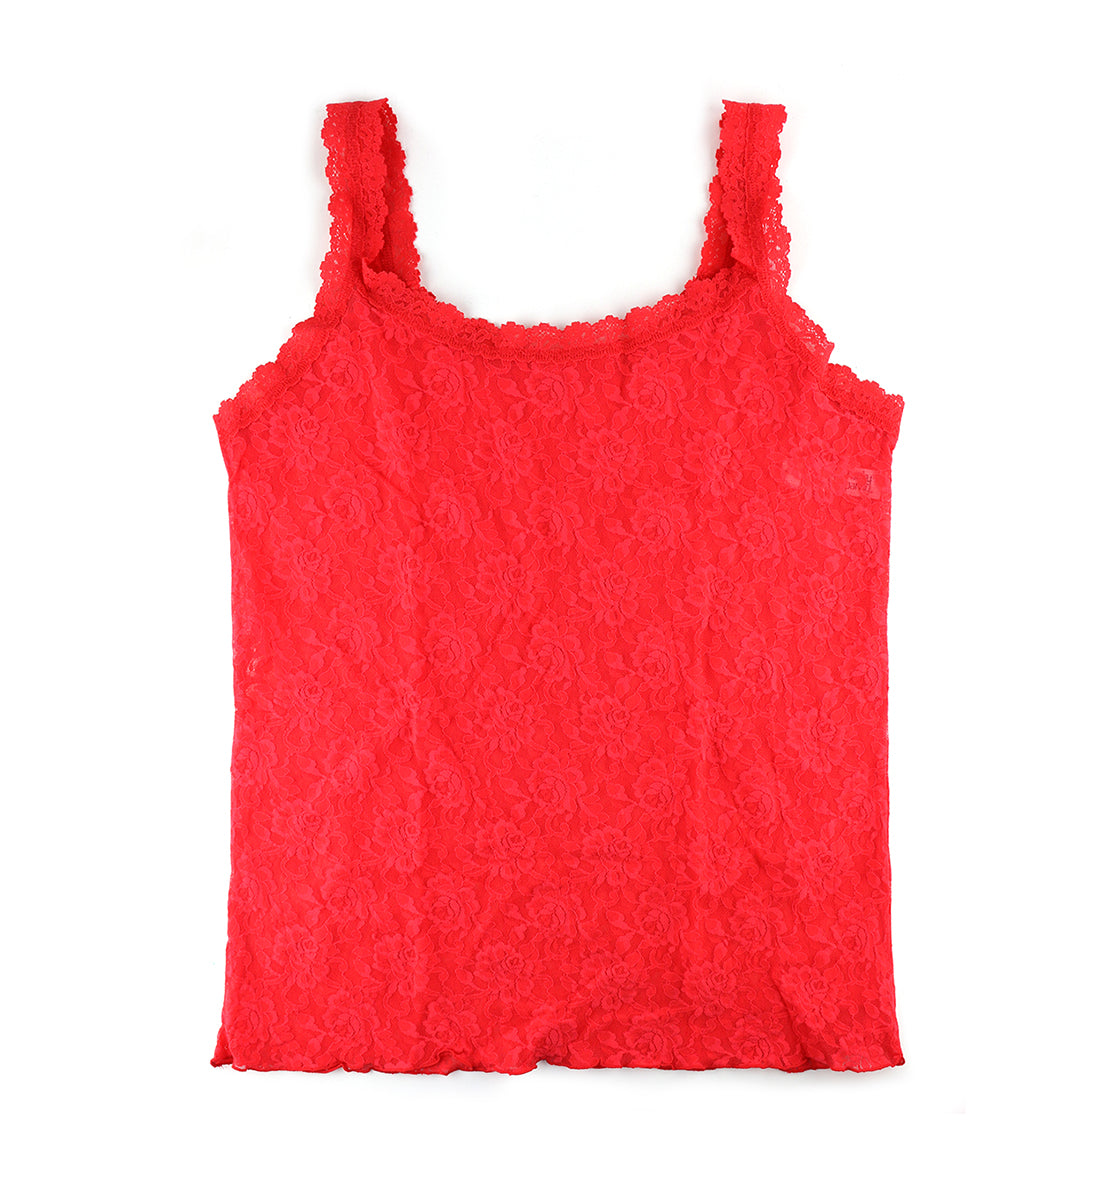 Hanky Panky Signature Lace Unlined Camisole PLUS (1390LX),1X,Deep Sea Coral - Deep Sea Coral,1X